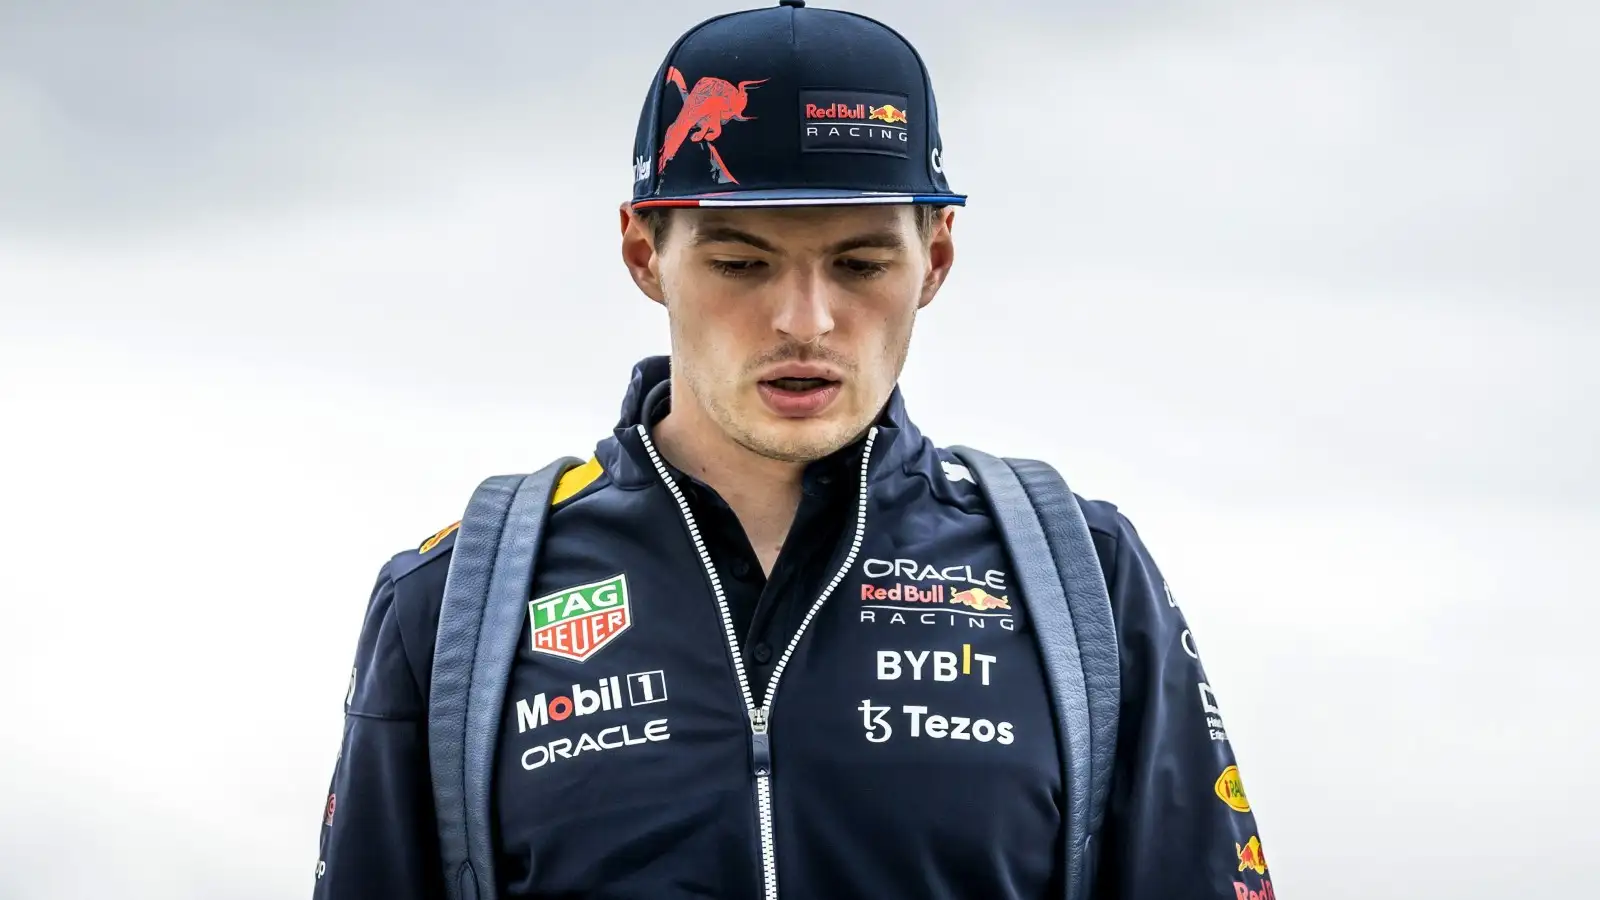 Max Verstappen, Red Bull, in the Silverstone paddock. England, June 2022.